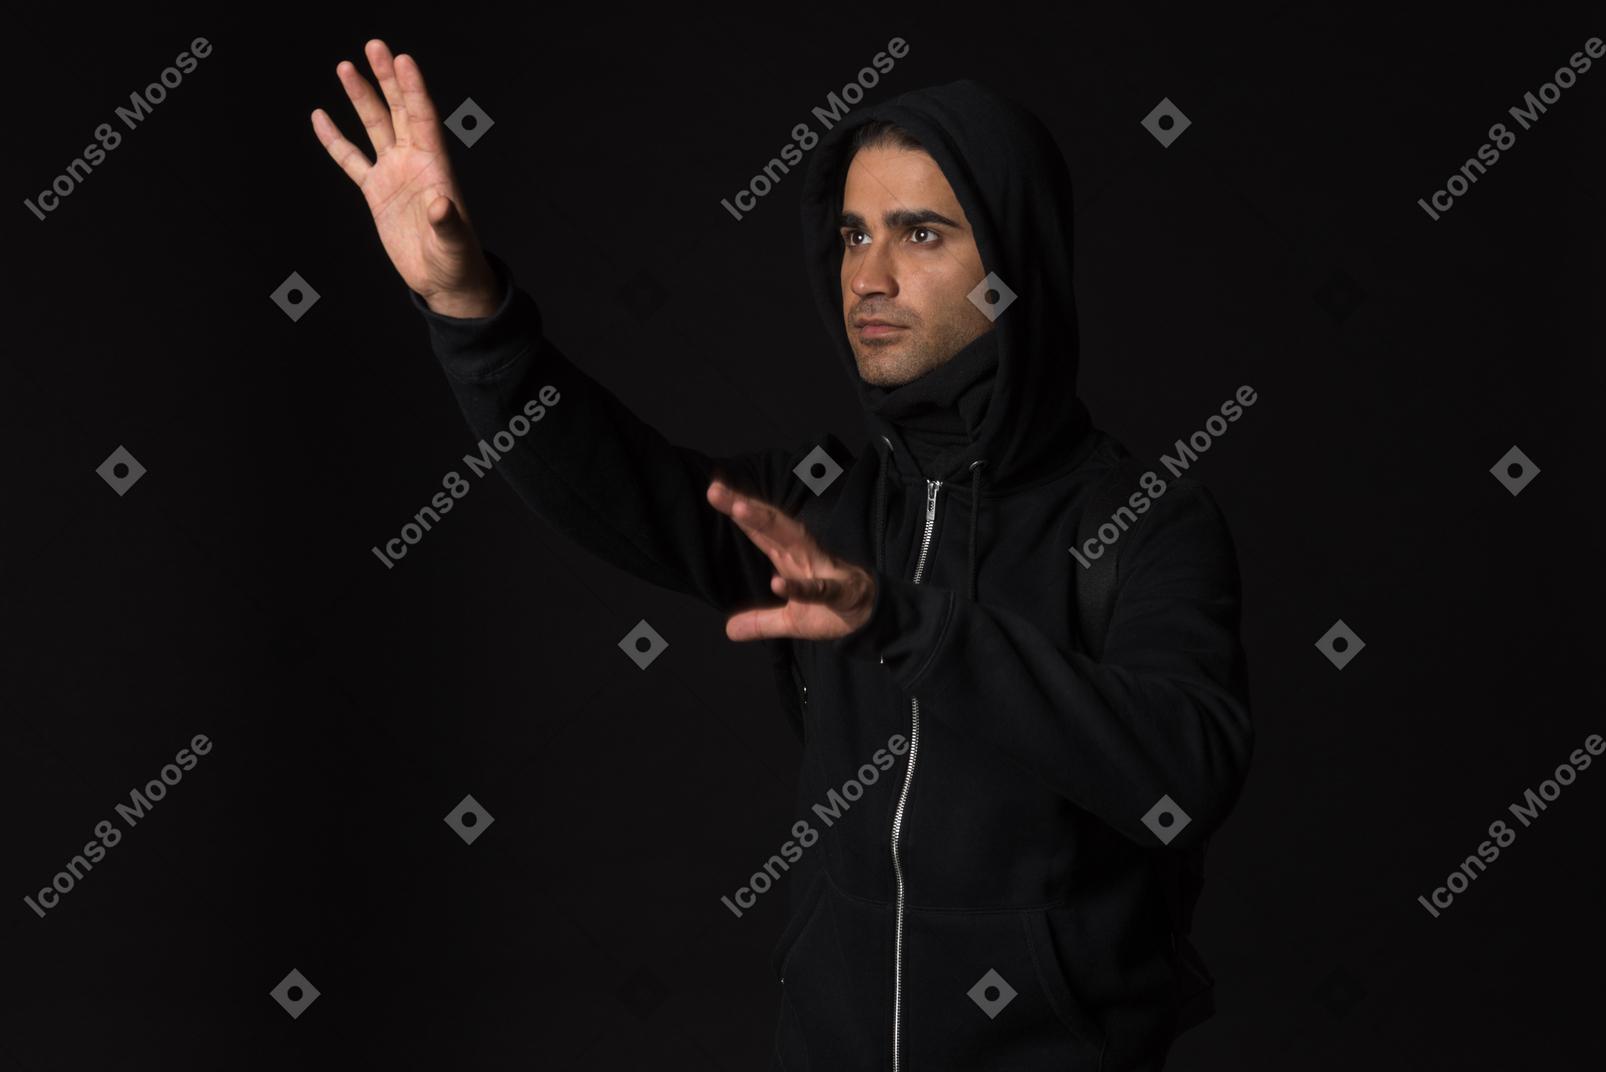 Hacker guy standing in the dark and like touching something with hands